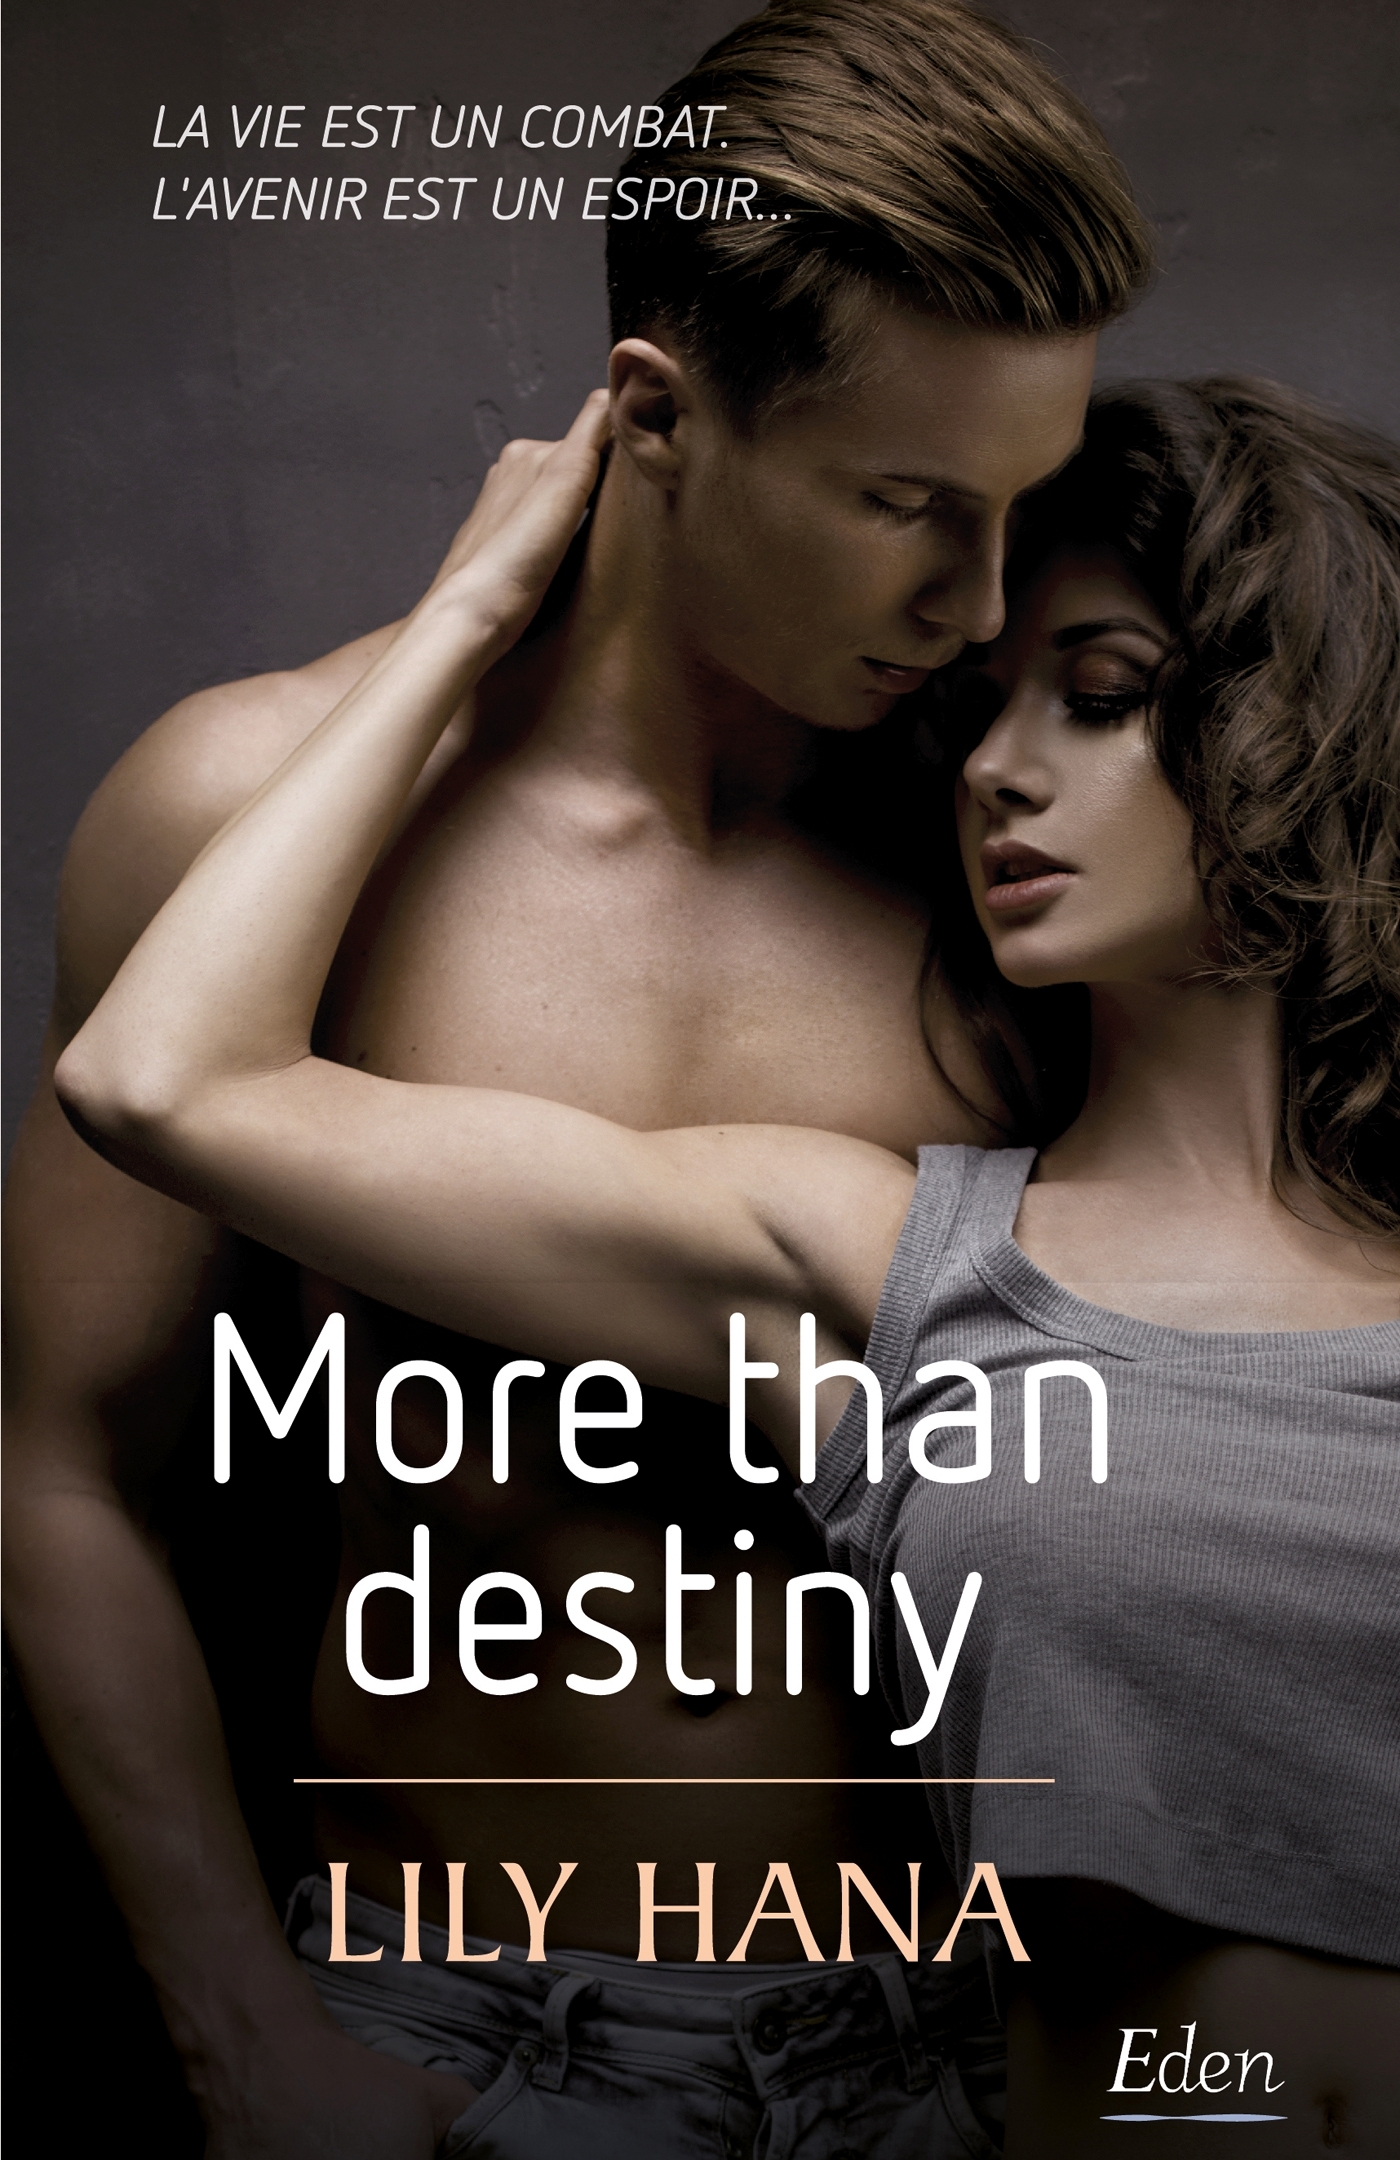 More than destiny (9782824612188-front-cover)